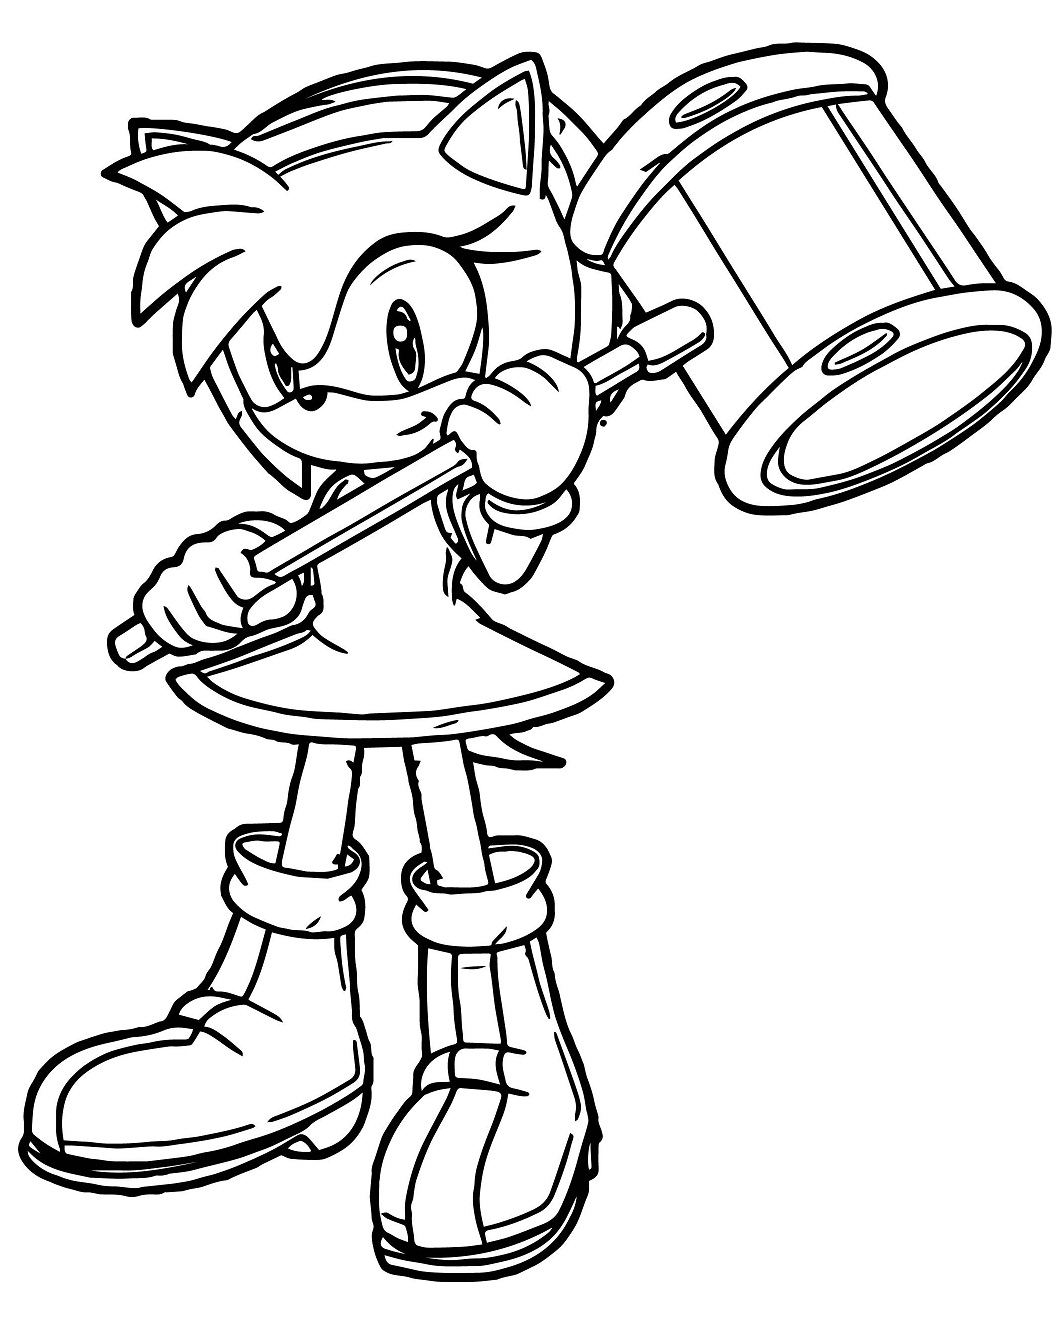 Amy Rose With Hammer